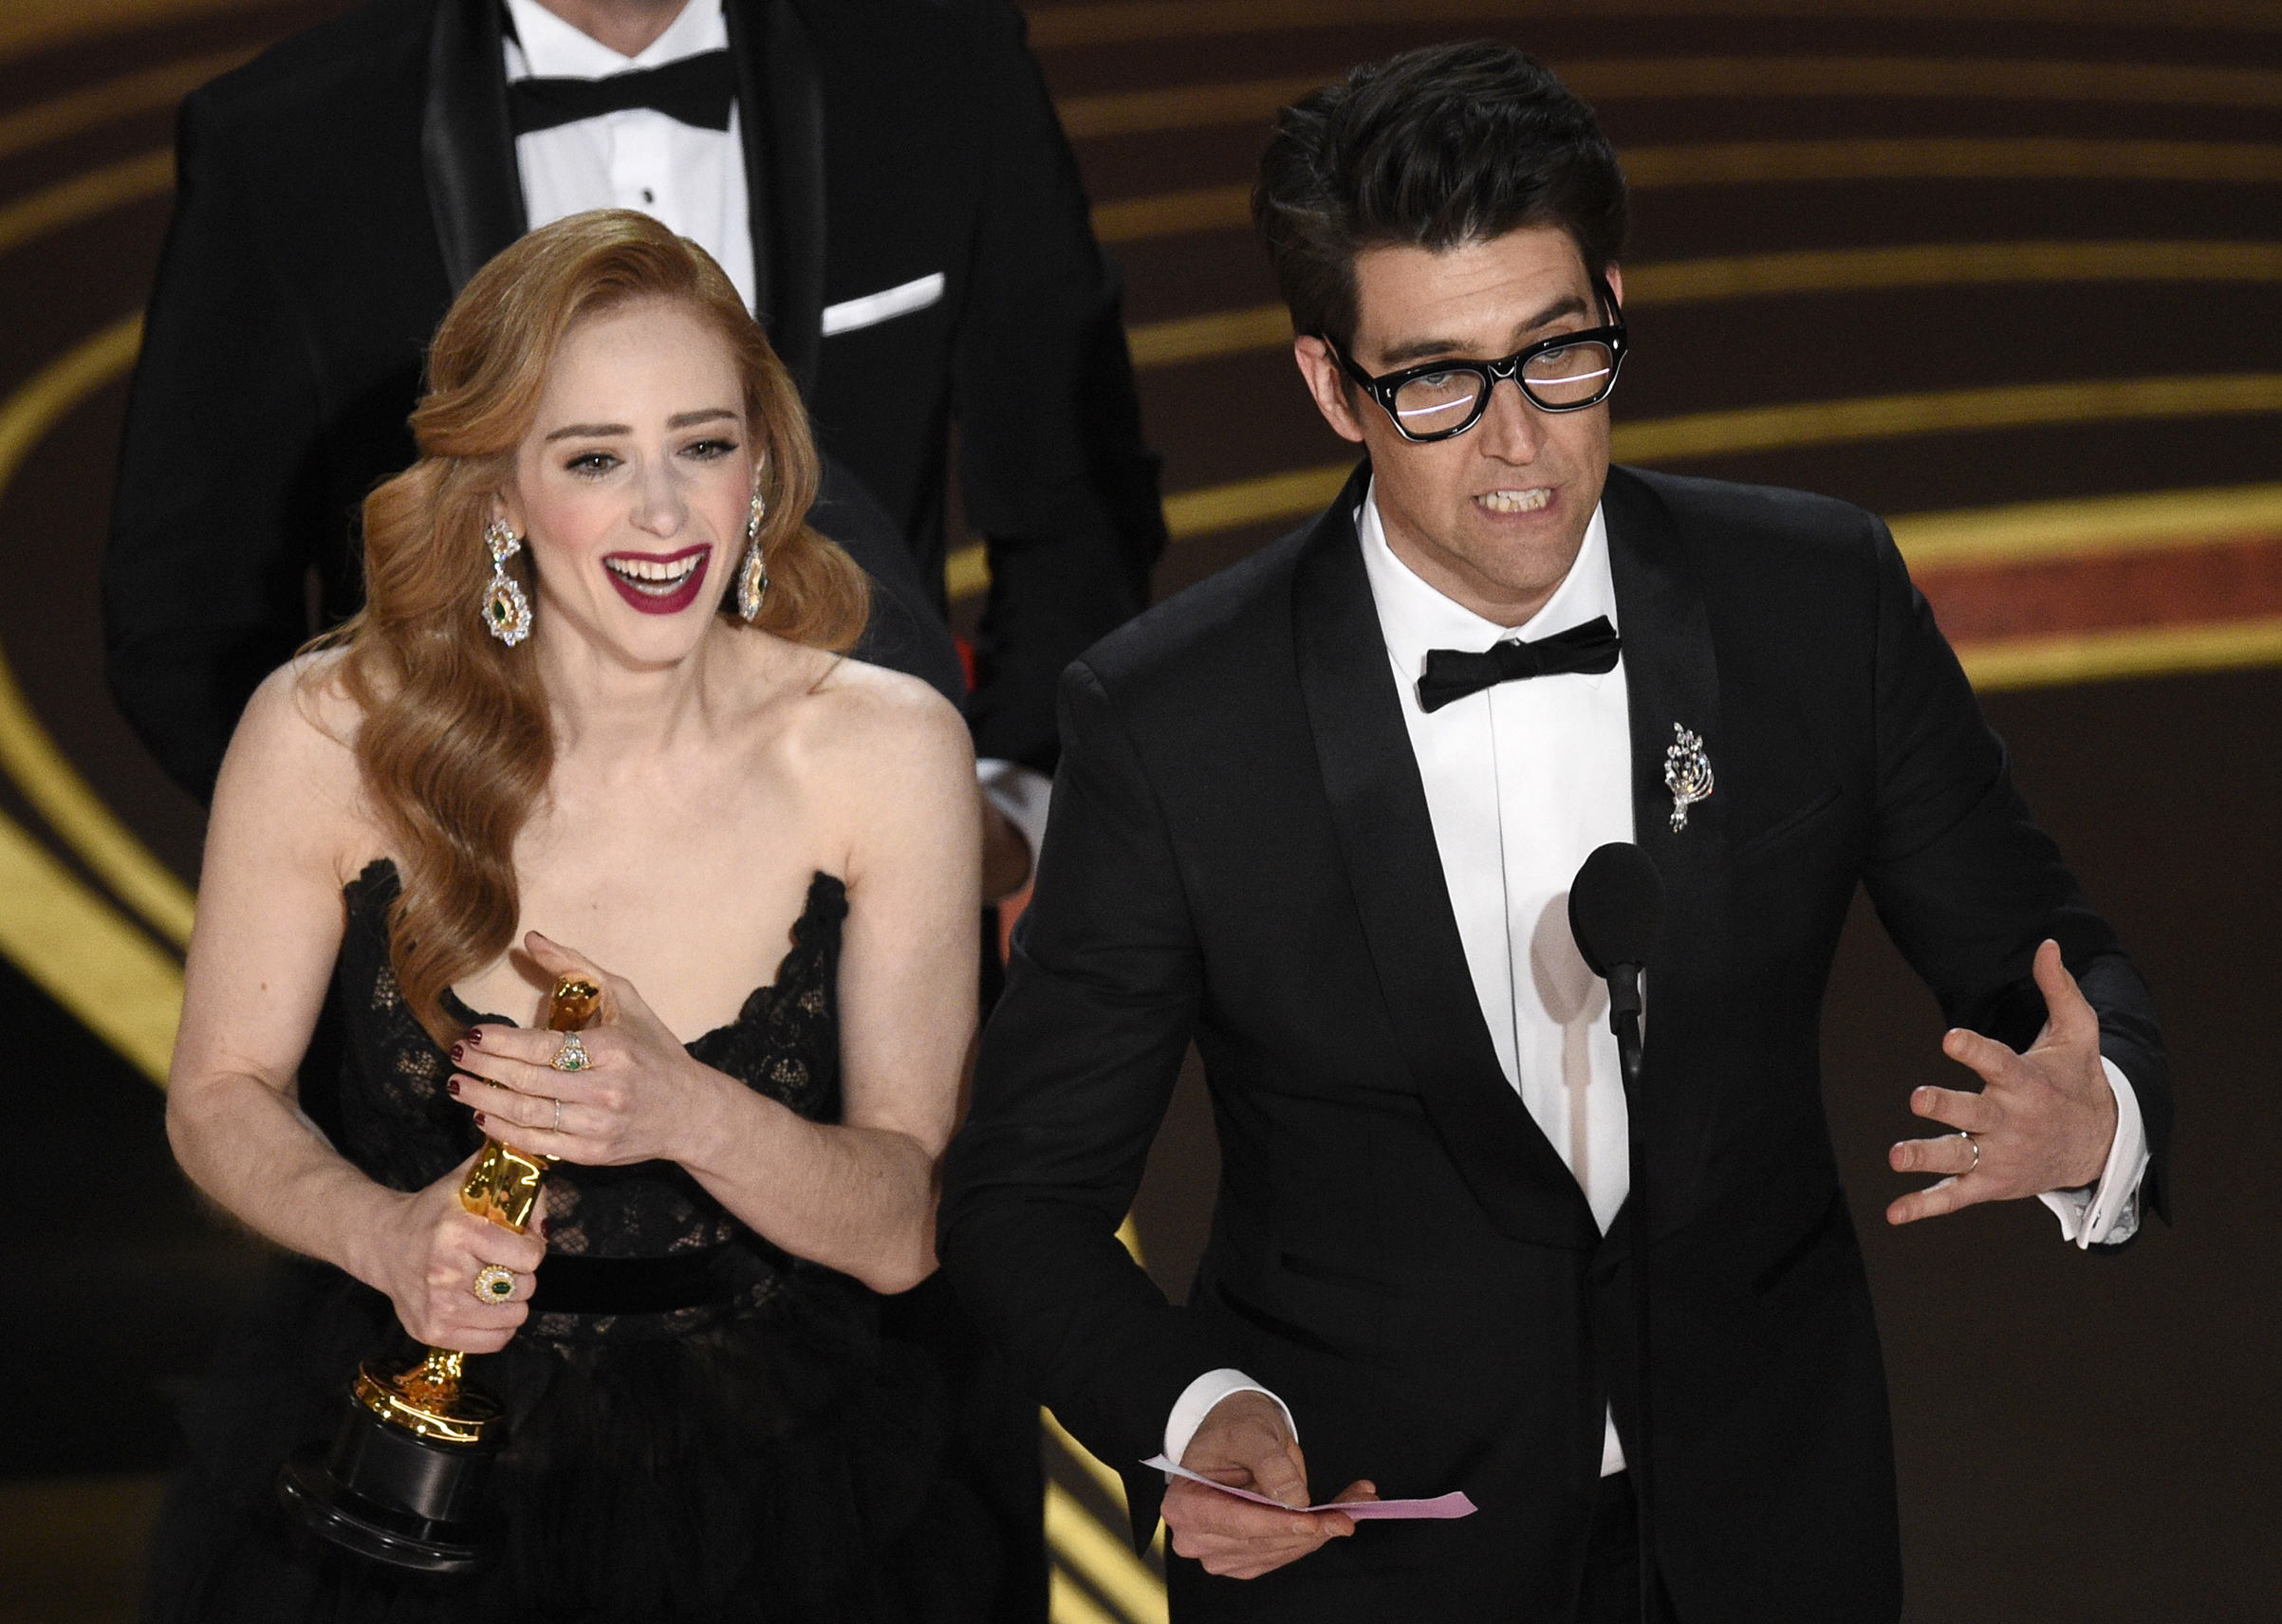 Guy Nattiv, right, and Jaime Ray Newman accept the award for best live action short film for "Skin" at the Oscars on Feb. 24, 2019. (Chris Pizzello—Invision/AP)